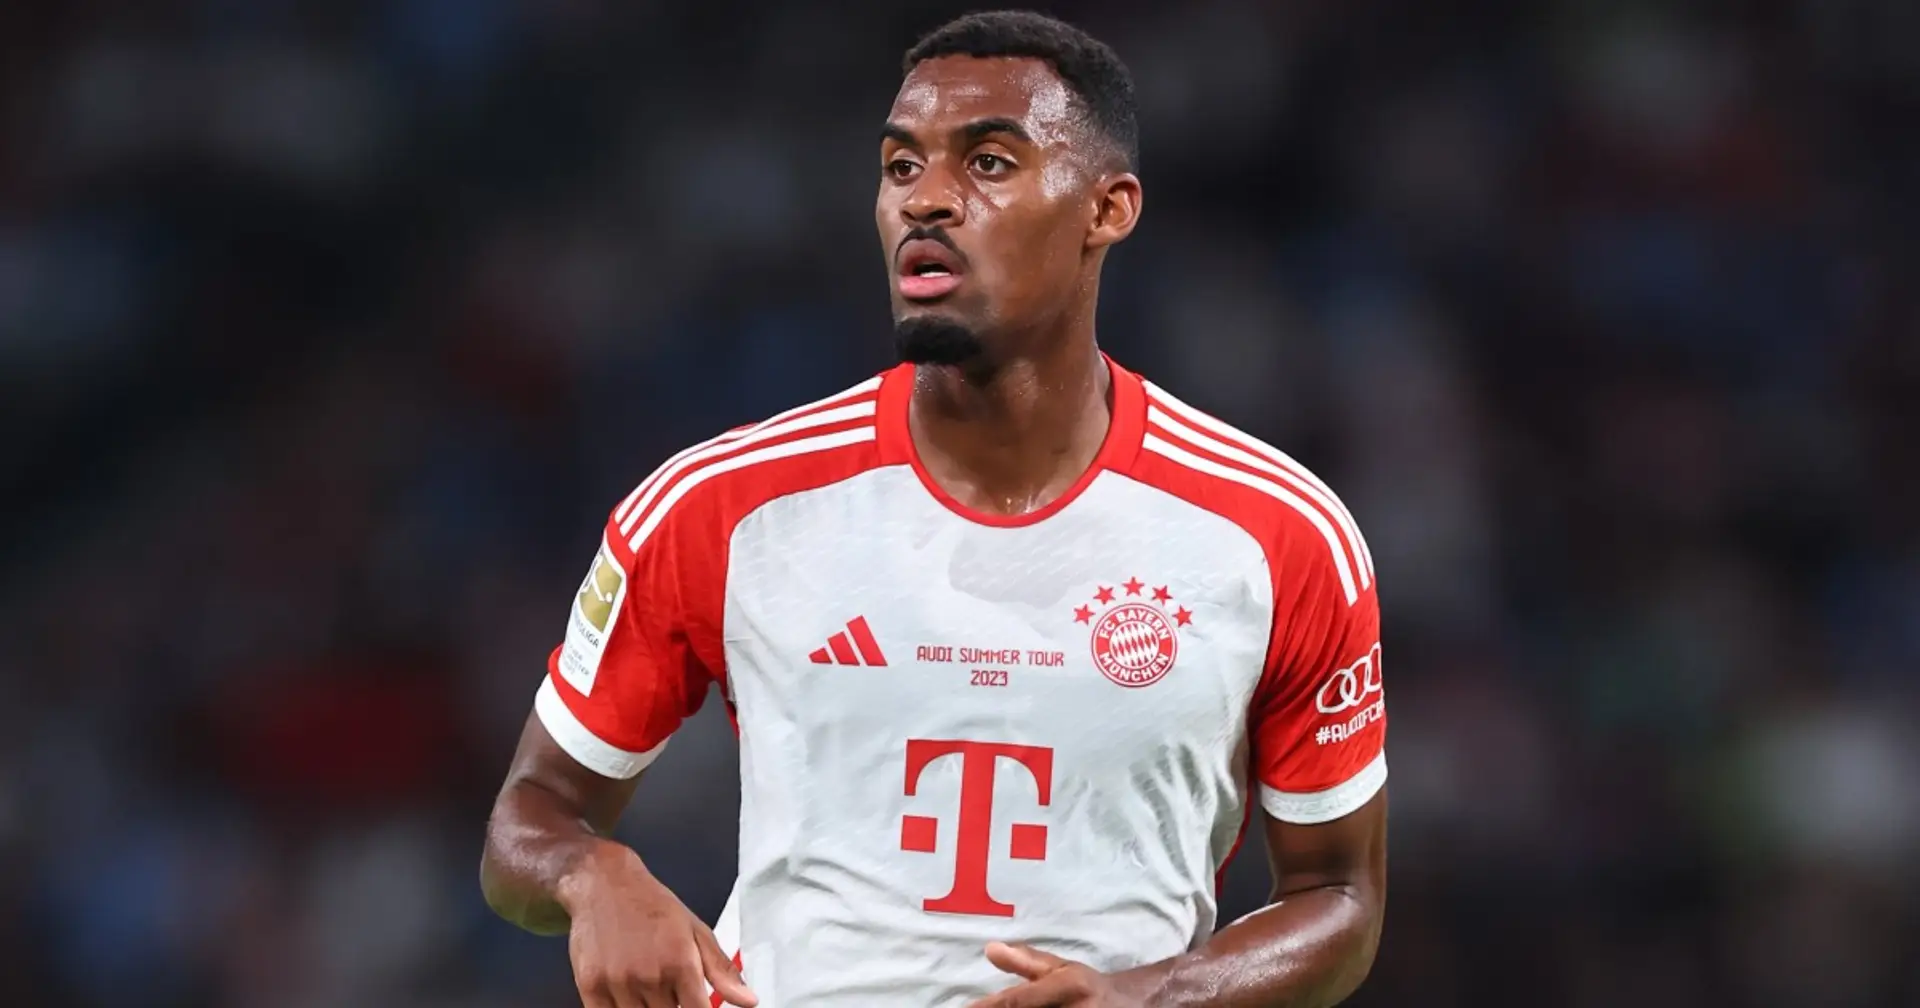 Liverpool could push for Gravernberch, Bayern waiting for concrete offer: Sky Germany